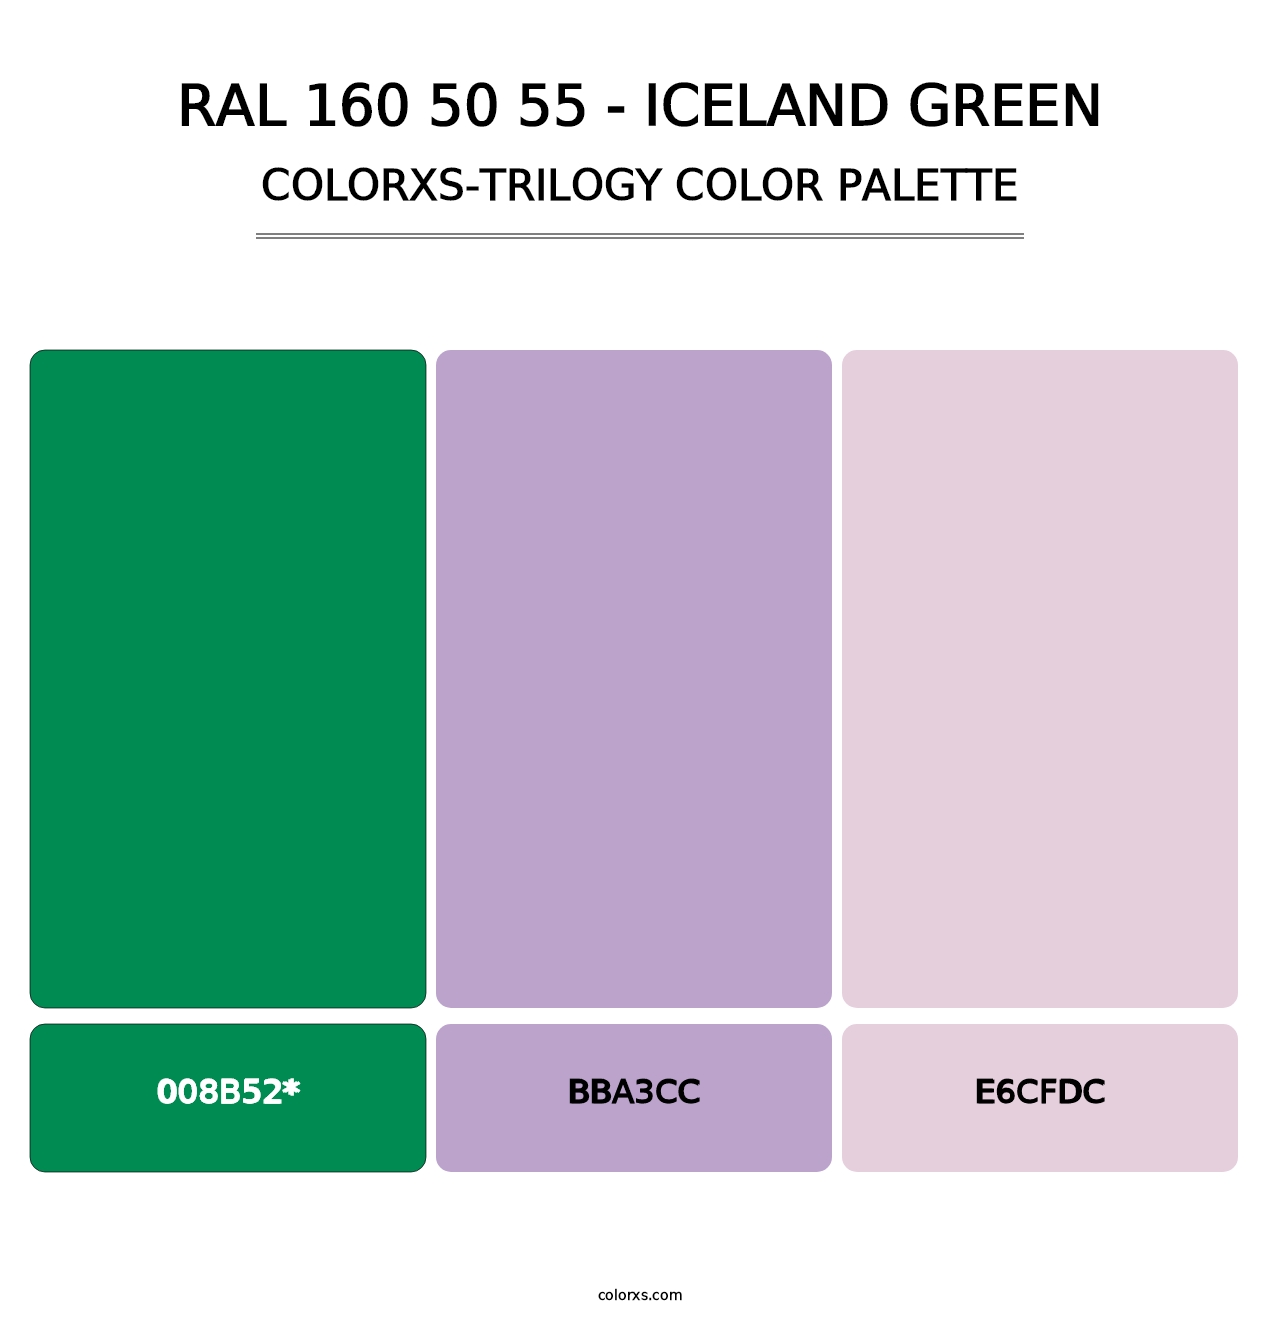 RAL 160 50 55 - Iceland Green - Colorxs Trilogy Palette